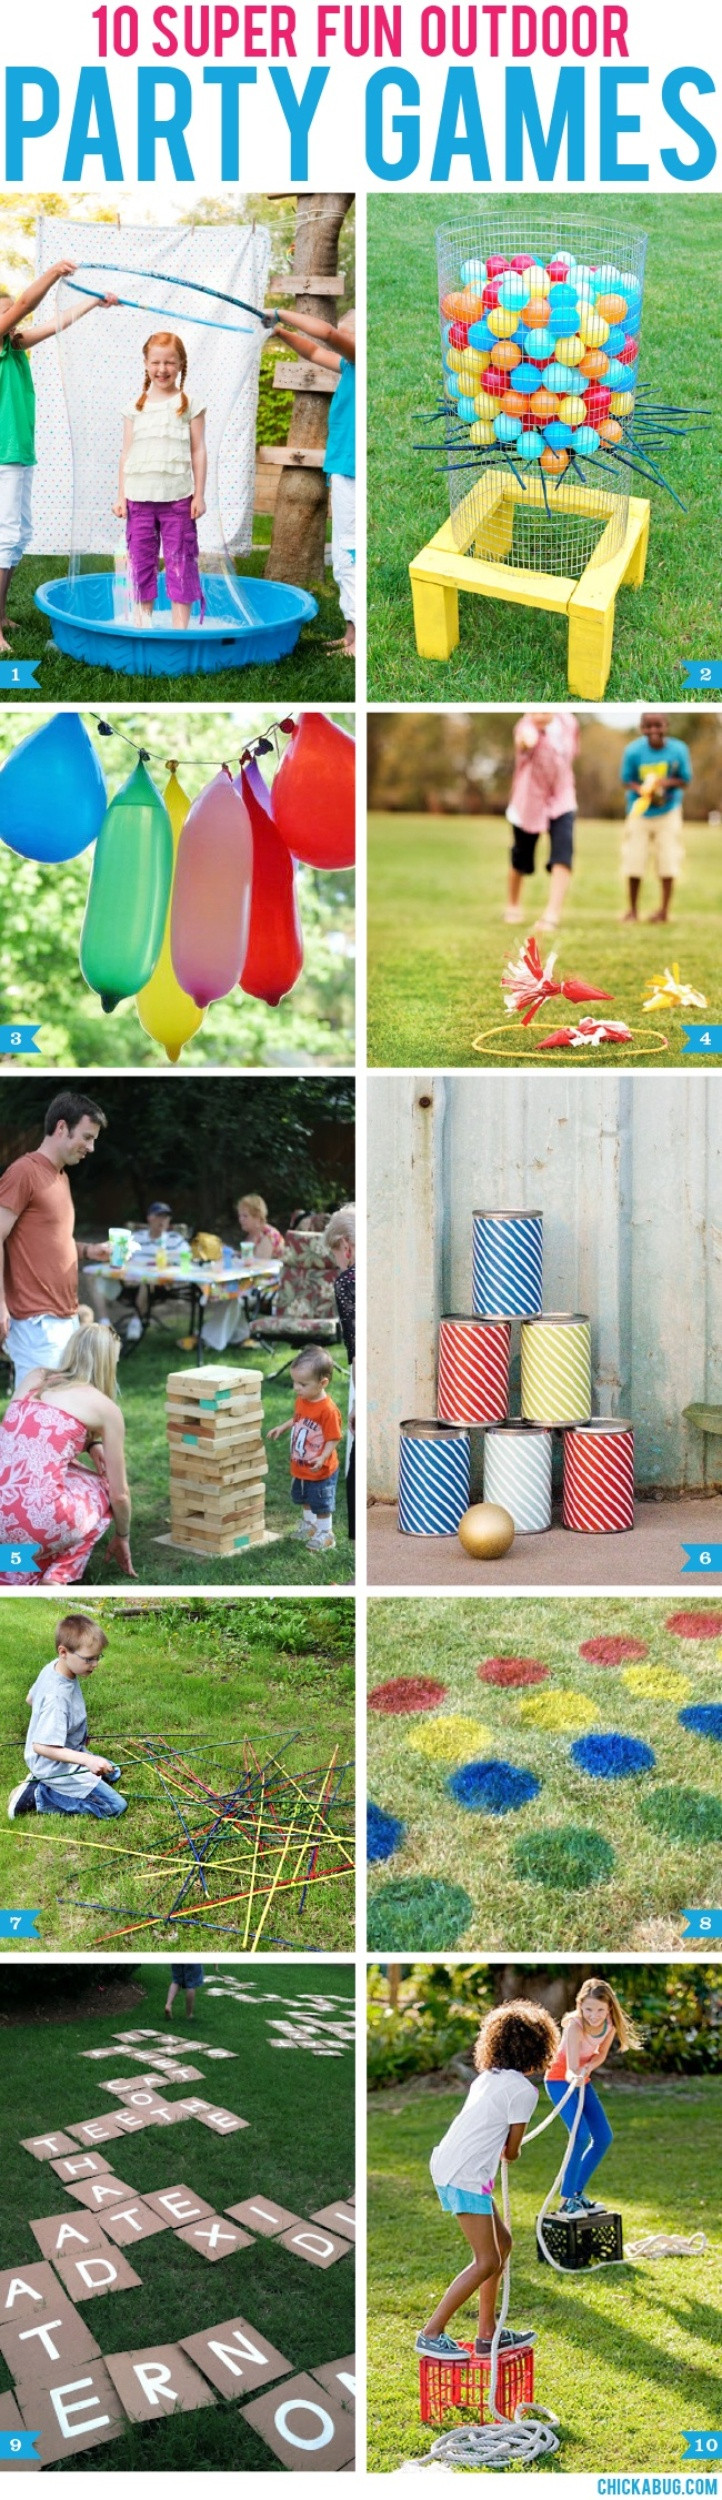 DIY Adult Party Games
 10 Super Fun DIY Outdoor Games for Labor Day Weekend